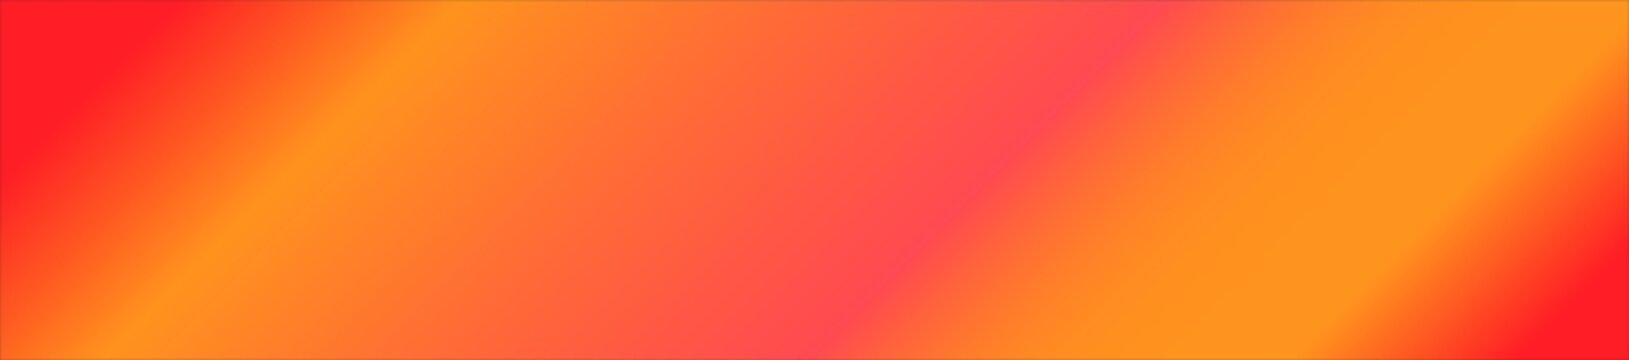 Bright Orange and Red angled web banner gradient background for vibrant themes.